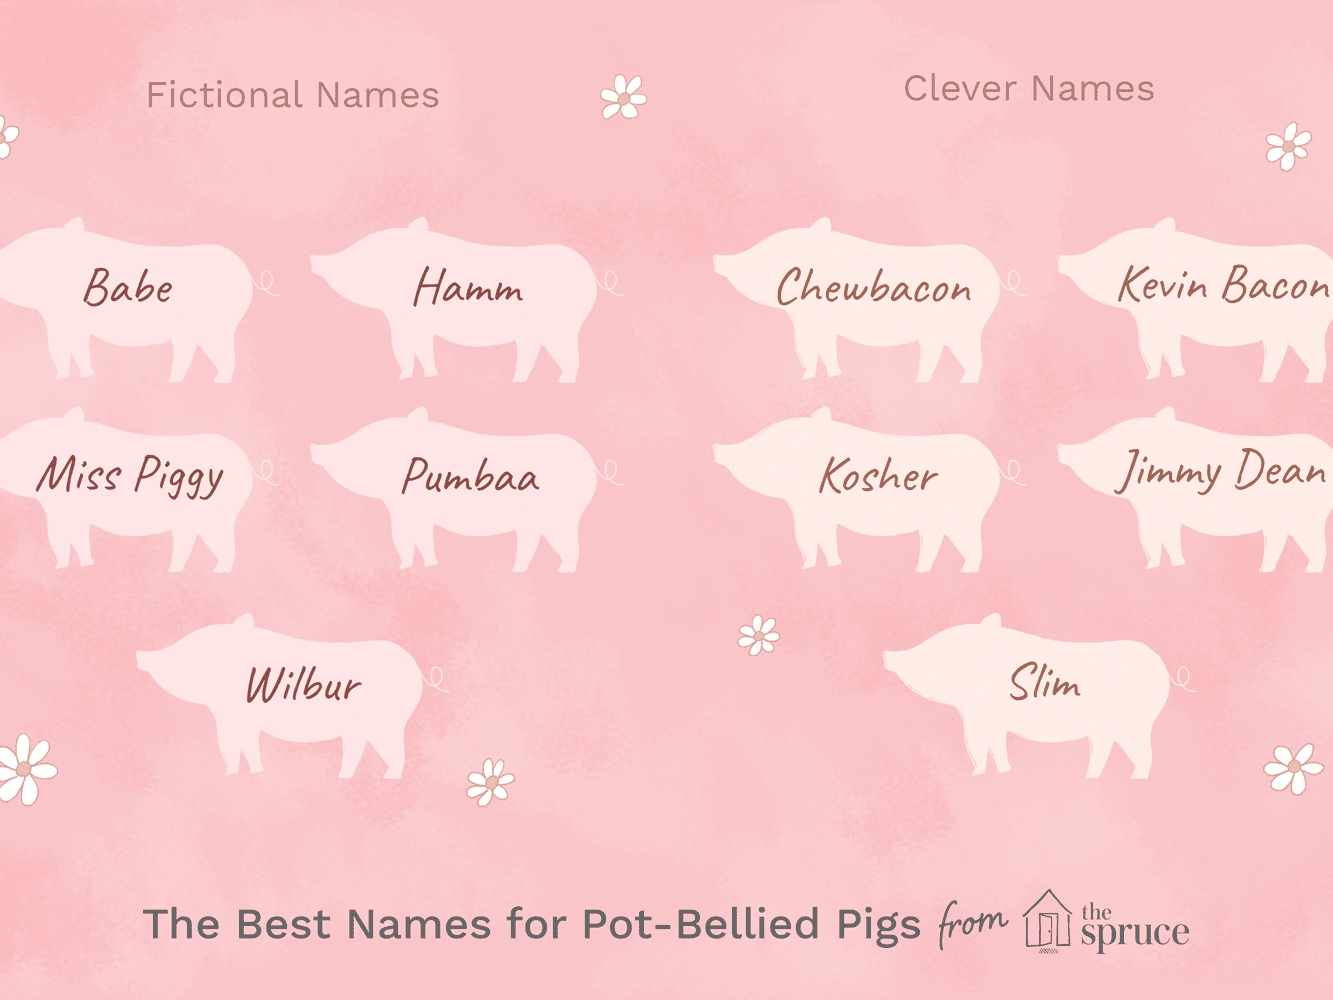 What are some good names for a purebred Piglet?